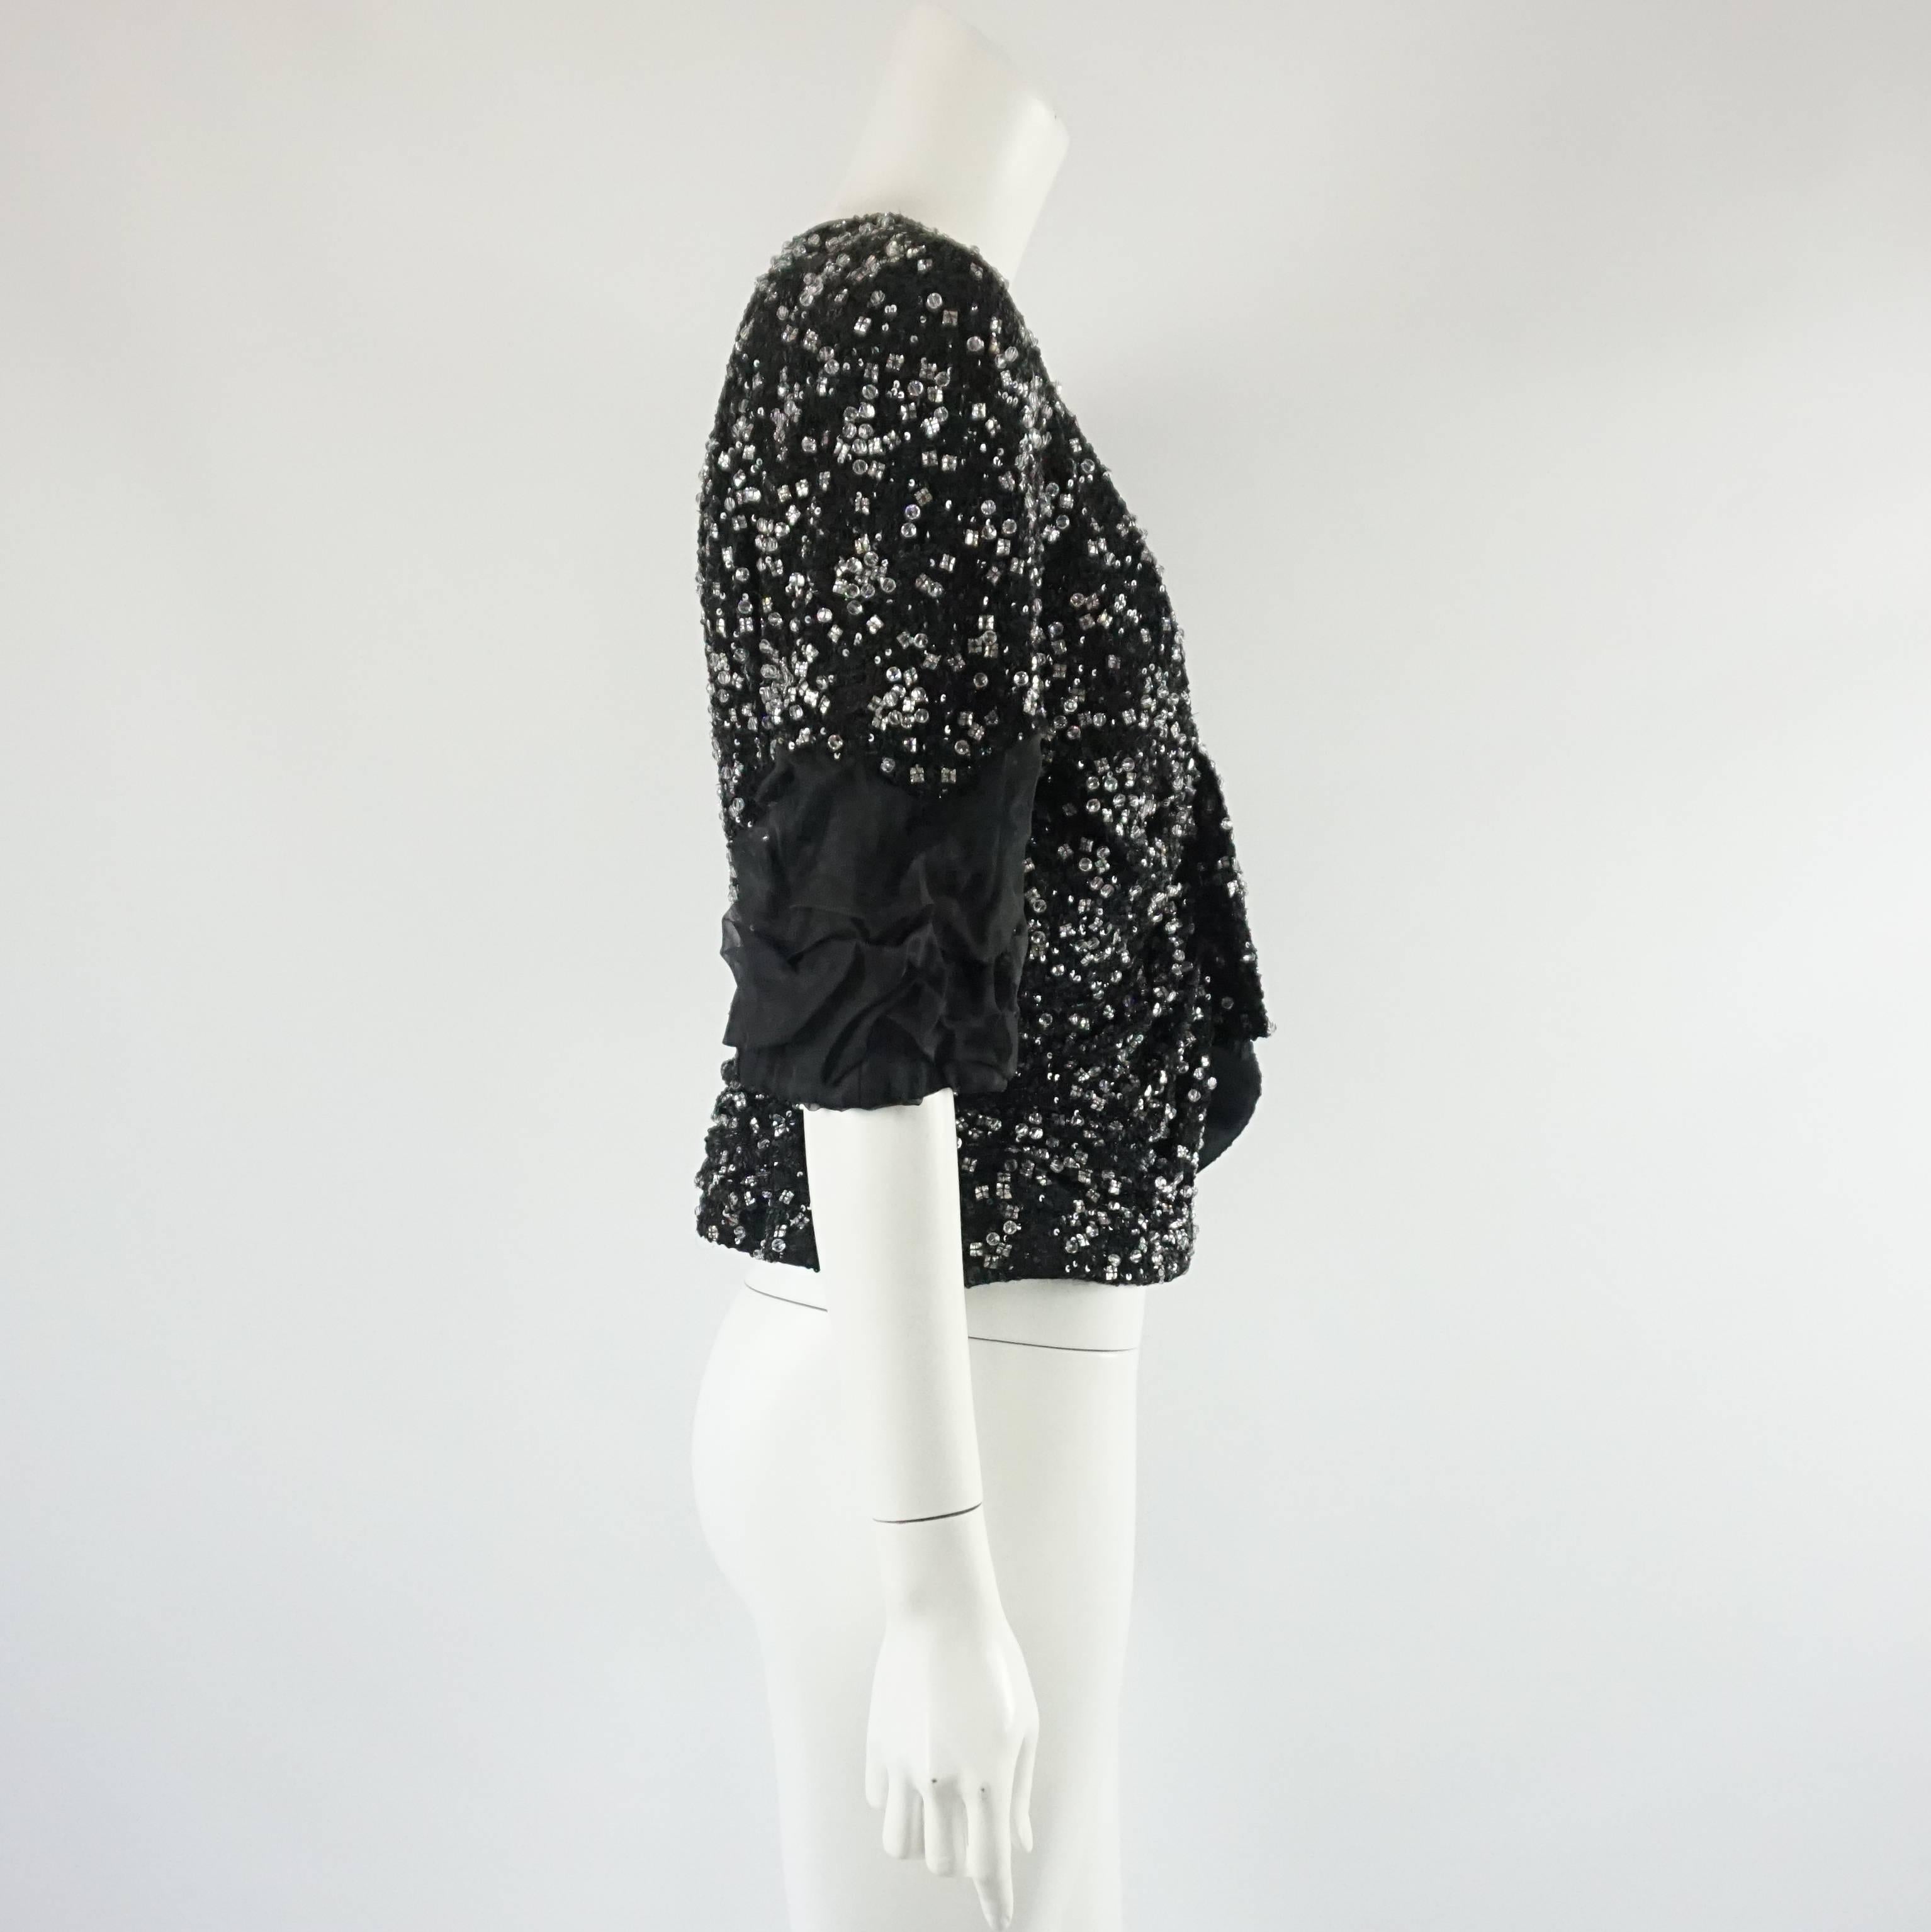 This stunning Giorgio Armani beaded jacket can also be worn as a top and has shoulder pads. The piece is made of silk and covered with small black sequins and embroidered on top with clear rhinestone beads. The sleeves fall at the elbows and have a